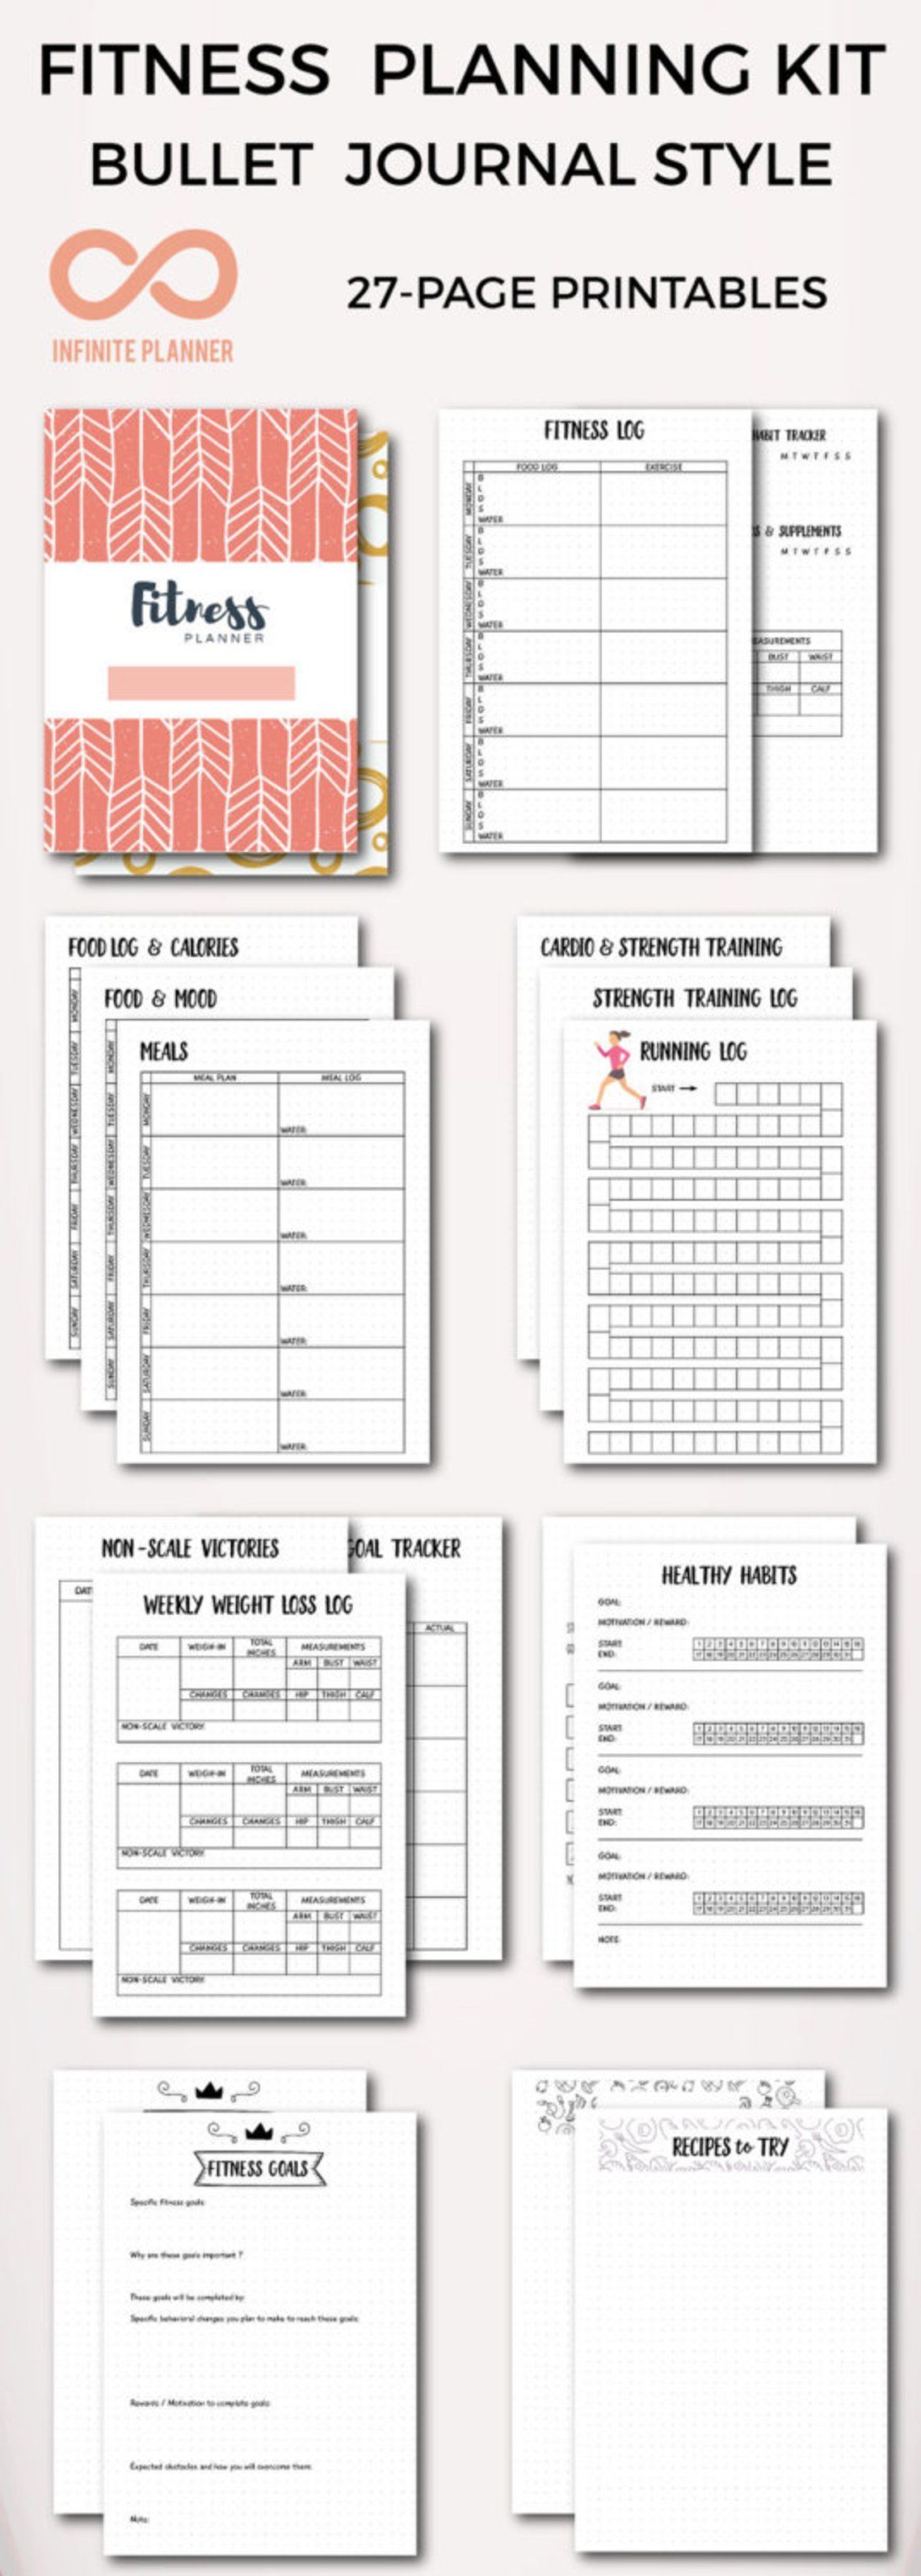 Coupon Inside - Fitness Mega Kit - Healthy Eating, Exercise, Nutrition, Diet, Meal Planning, Recipes - Bullet Journal Printable - Coupon Inside - Fitness Mega Kit - Healthy Eating, Exercise, Nutrition, Diet, Meal Planning, Recipes - Bullet Journal Printable -   19 how to create a fitness Journal ideas